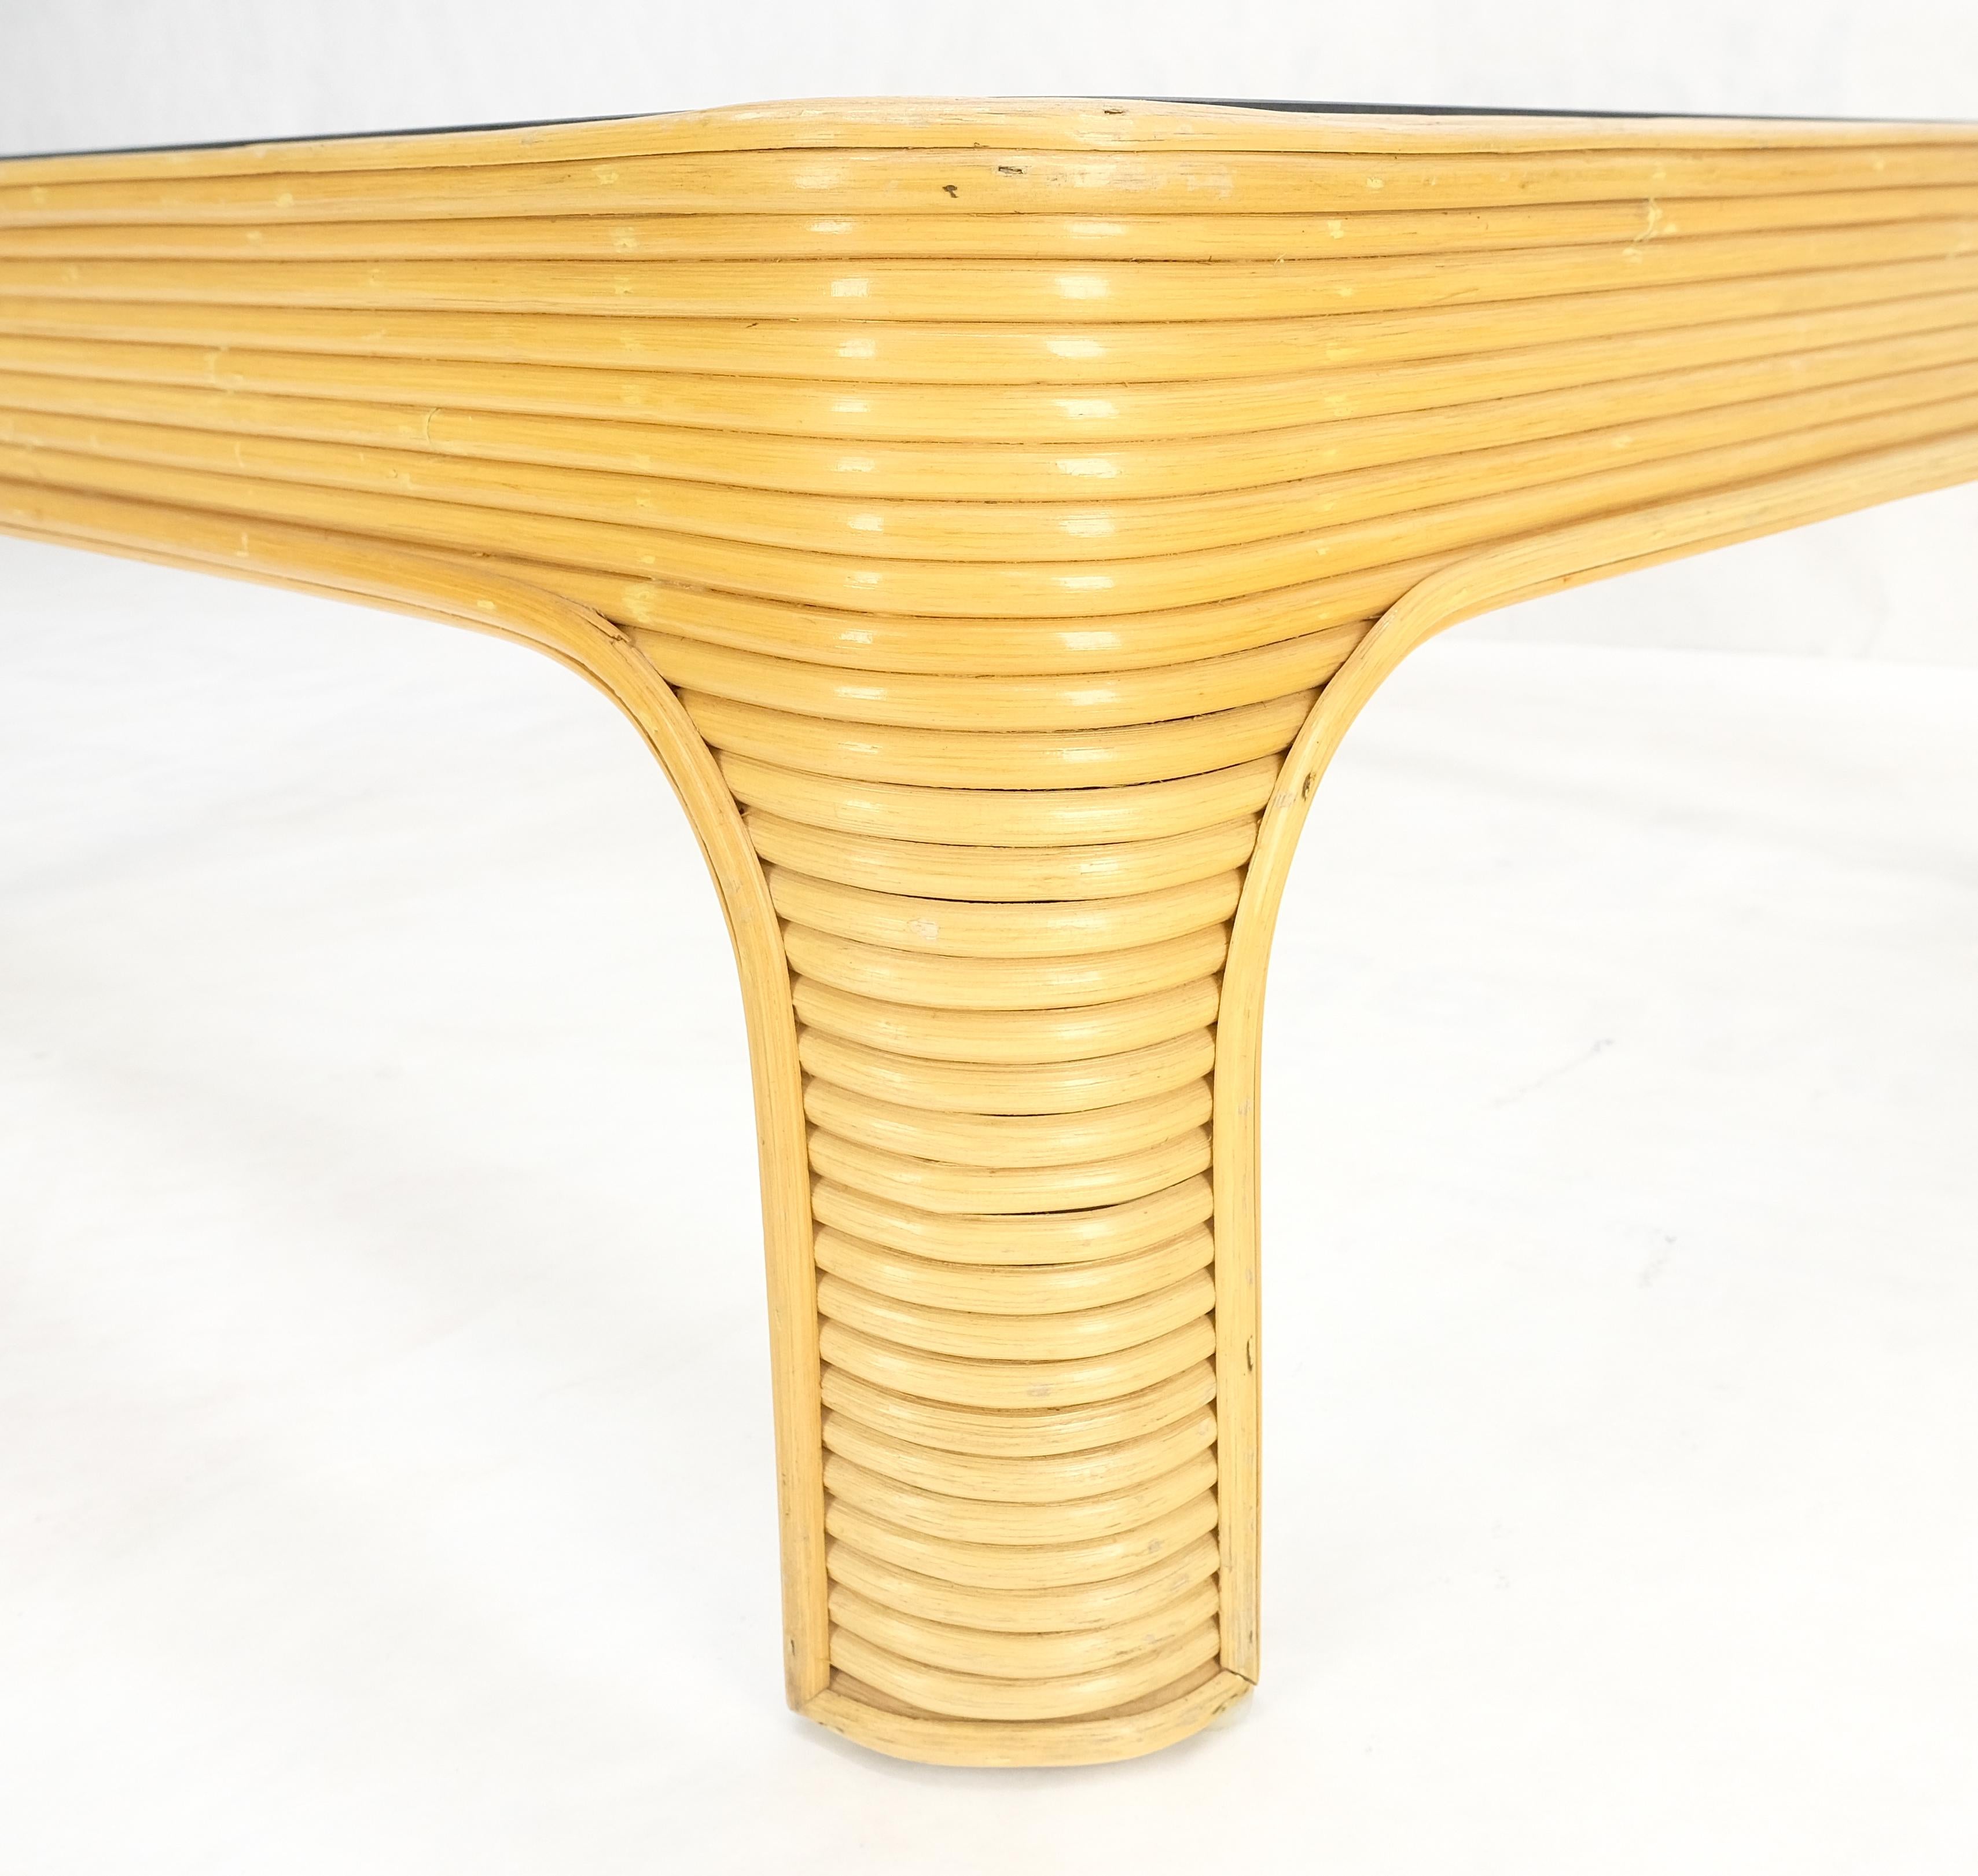 Blond Rattan Bamboo Rounded Corners Square Glass Top Coffee Table 1970's Frankl MINT!